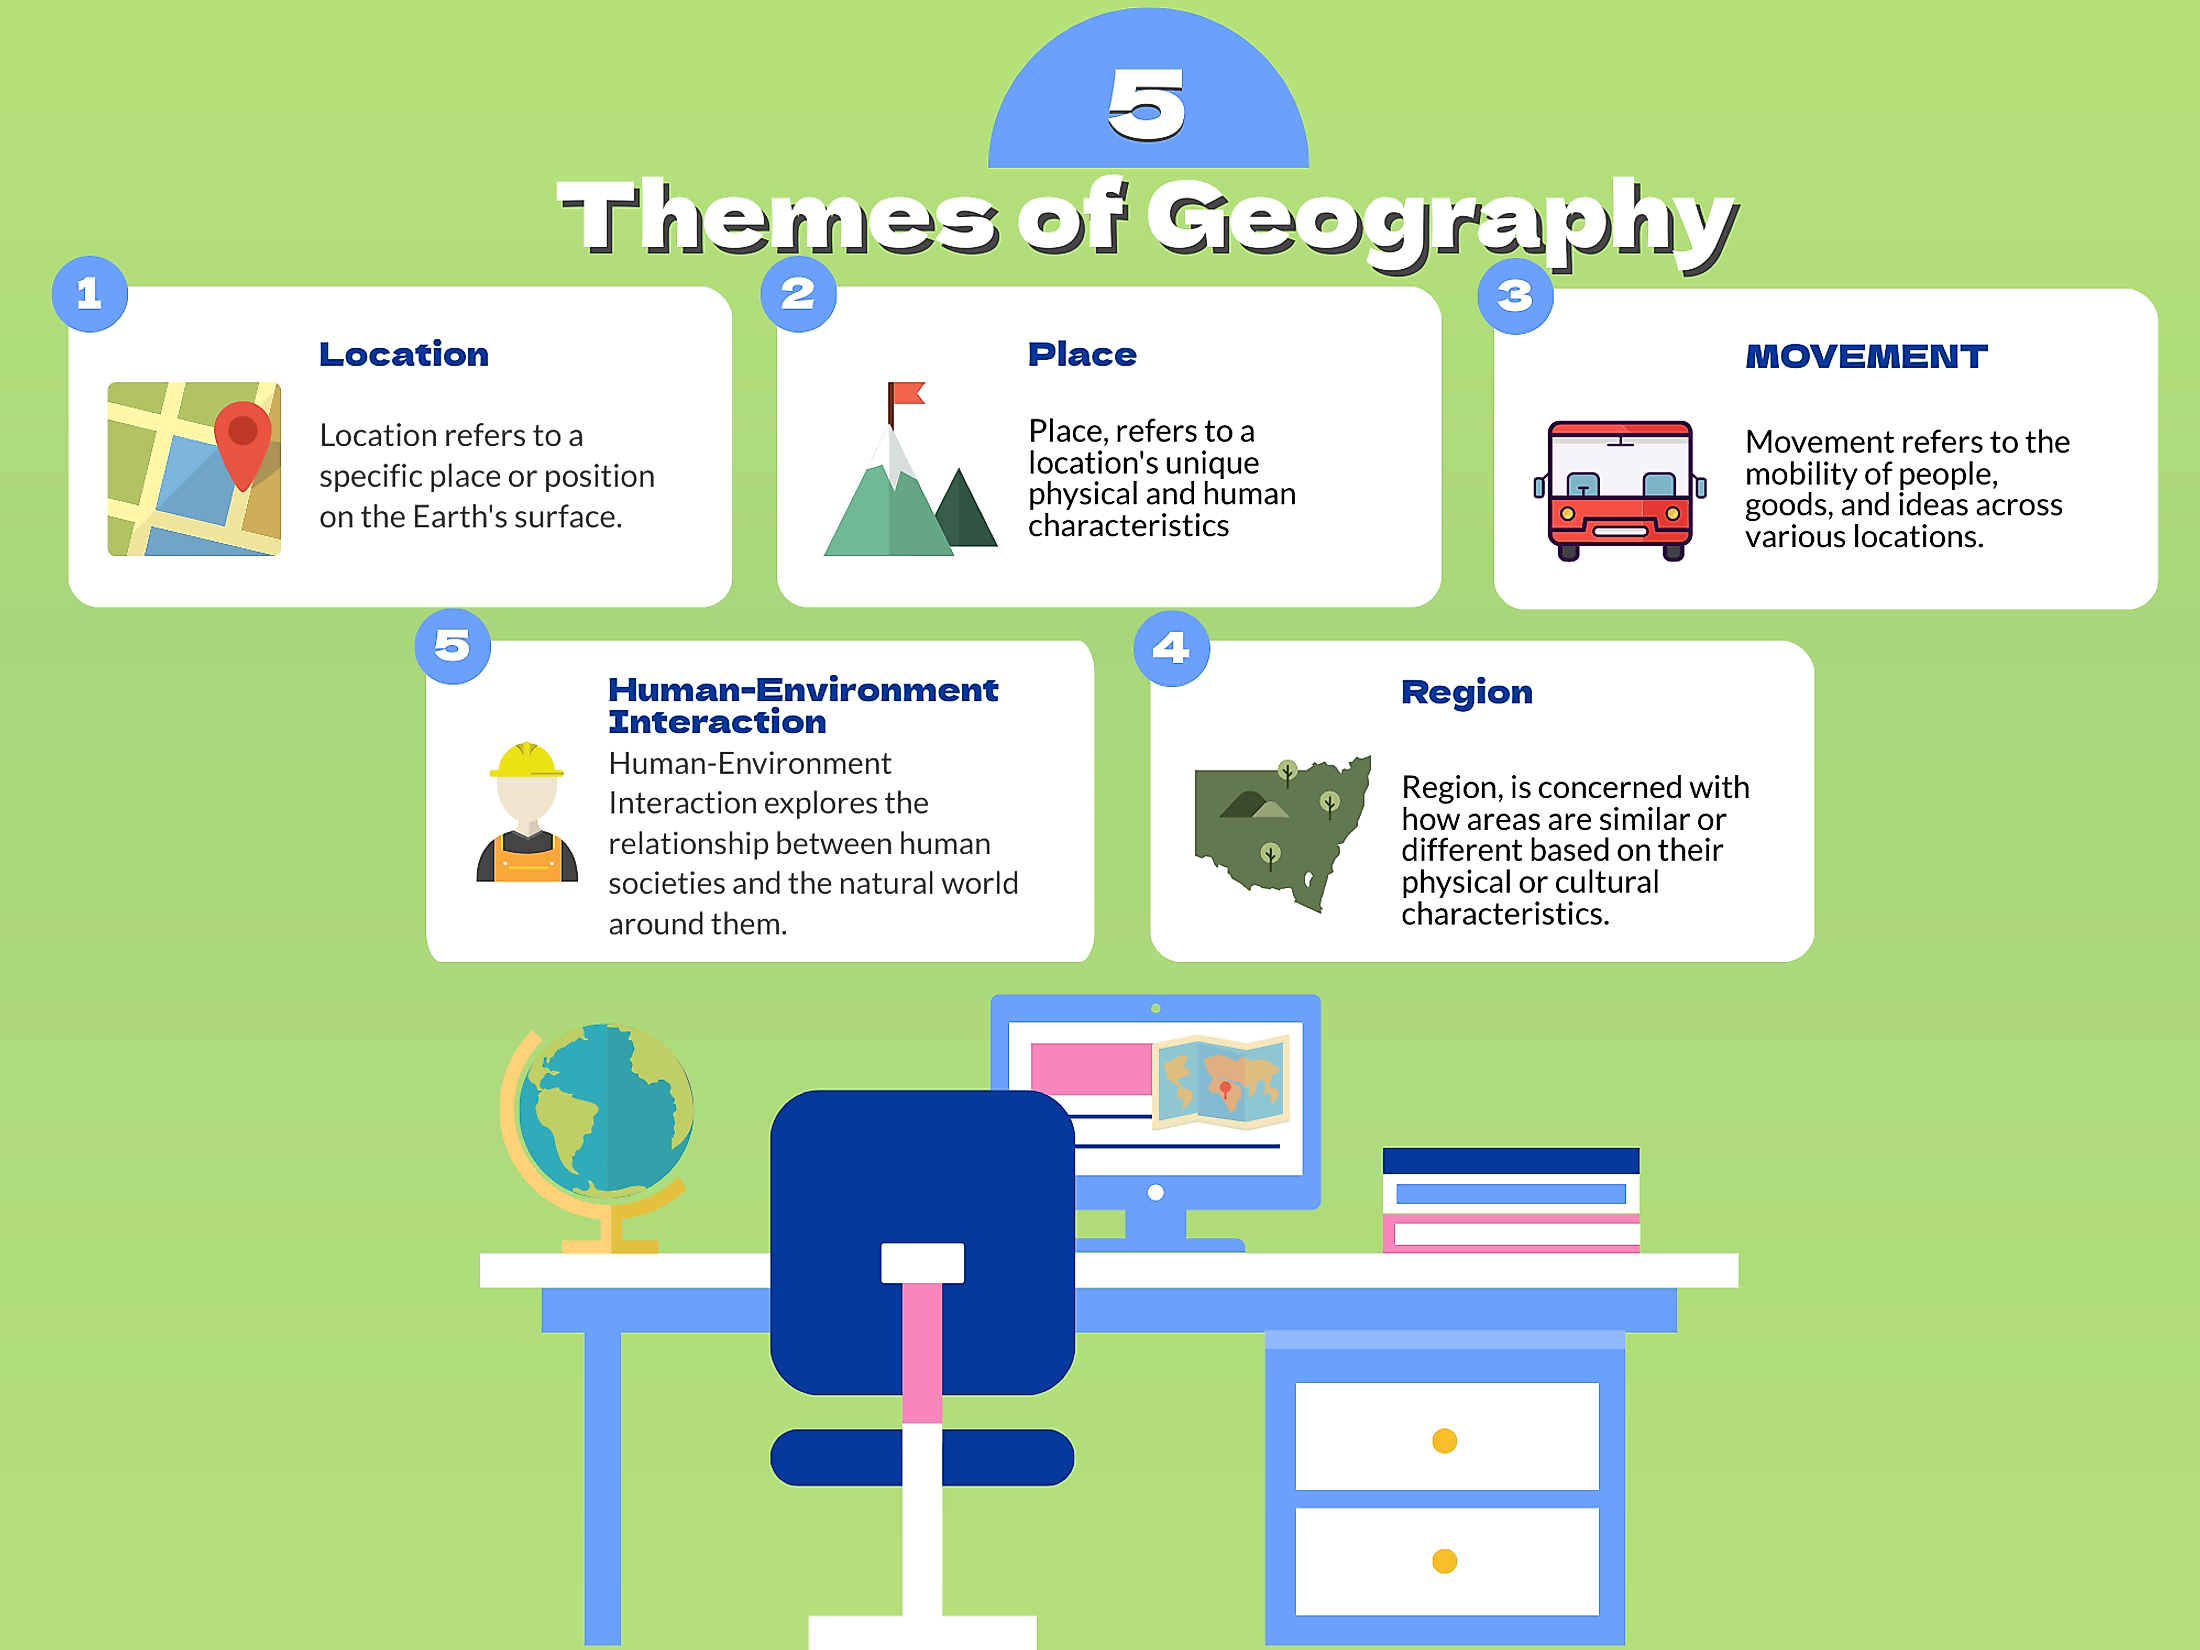 What are the 5 themes of geography region explained?